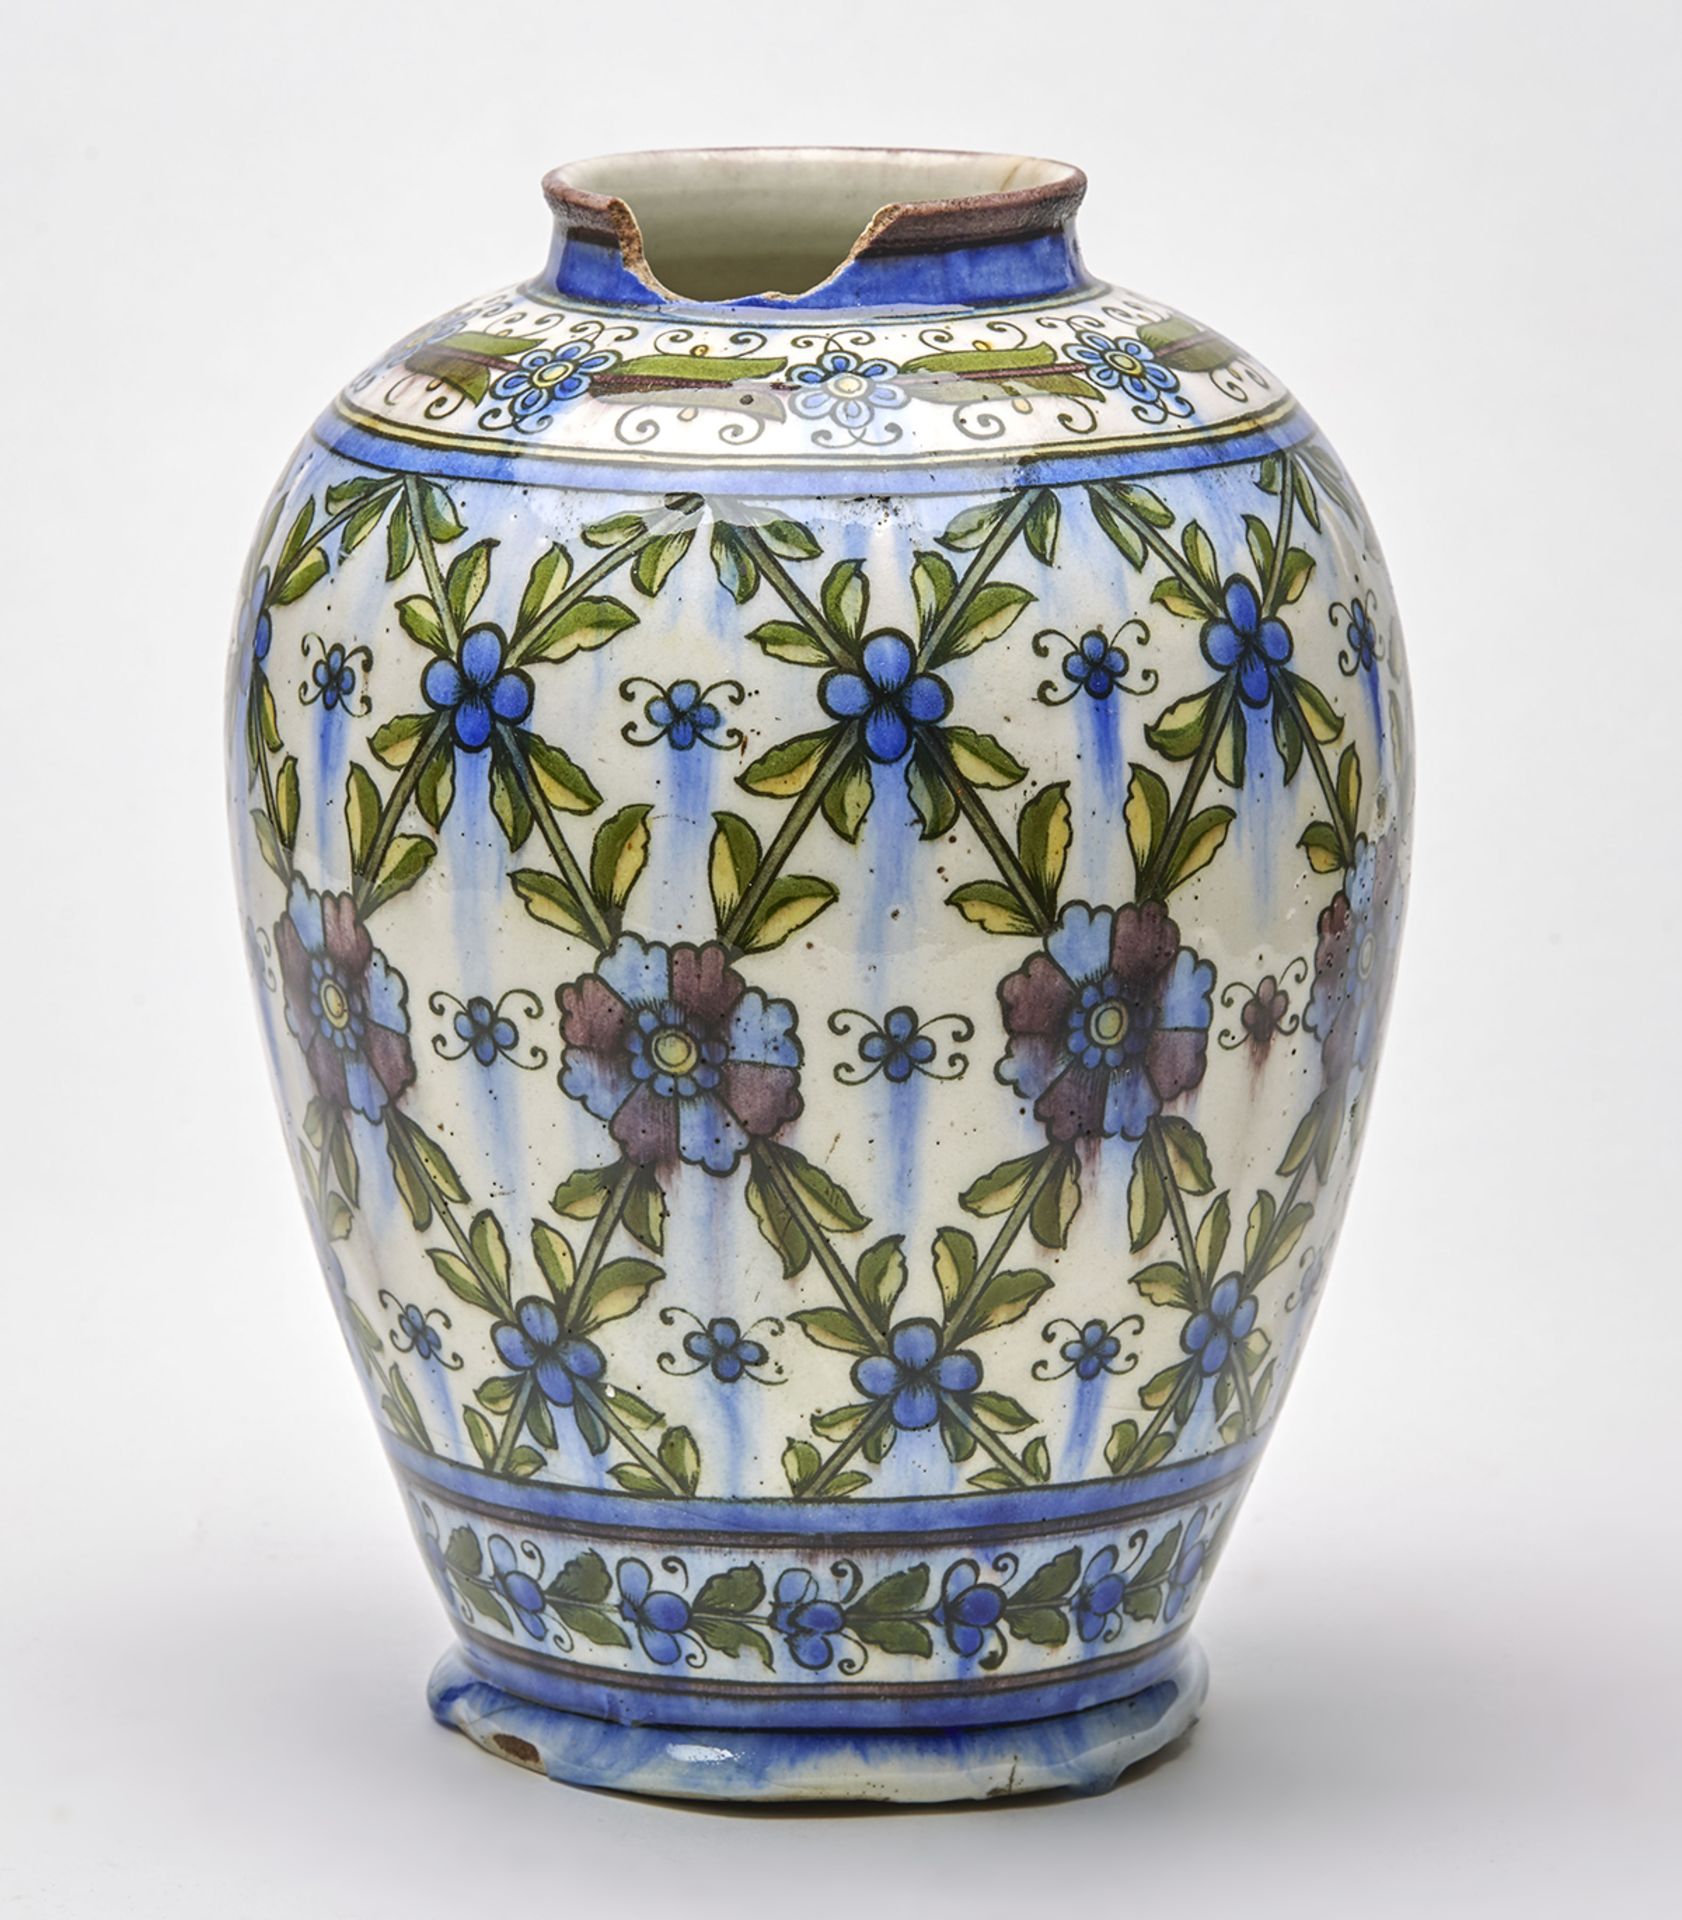 ANTIQUE PERSIAN FLORAL PAINTED BALUSTER FORM VASE, 19TH C.   DIMENSIONS   Height 28cm, Diameter 19, - Image 2 of 8